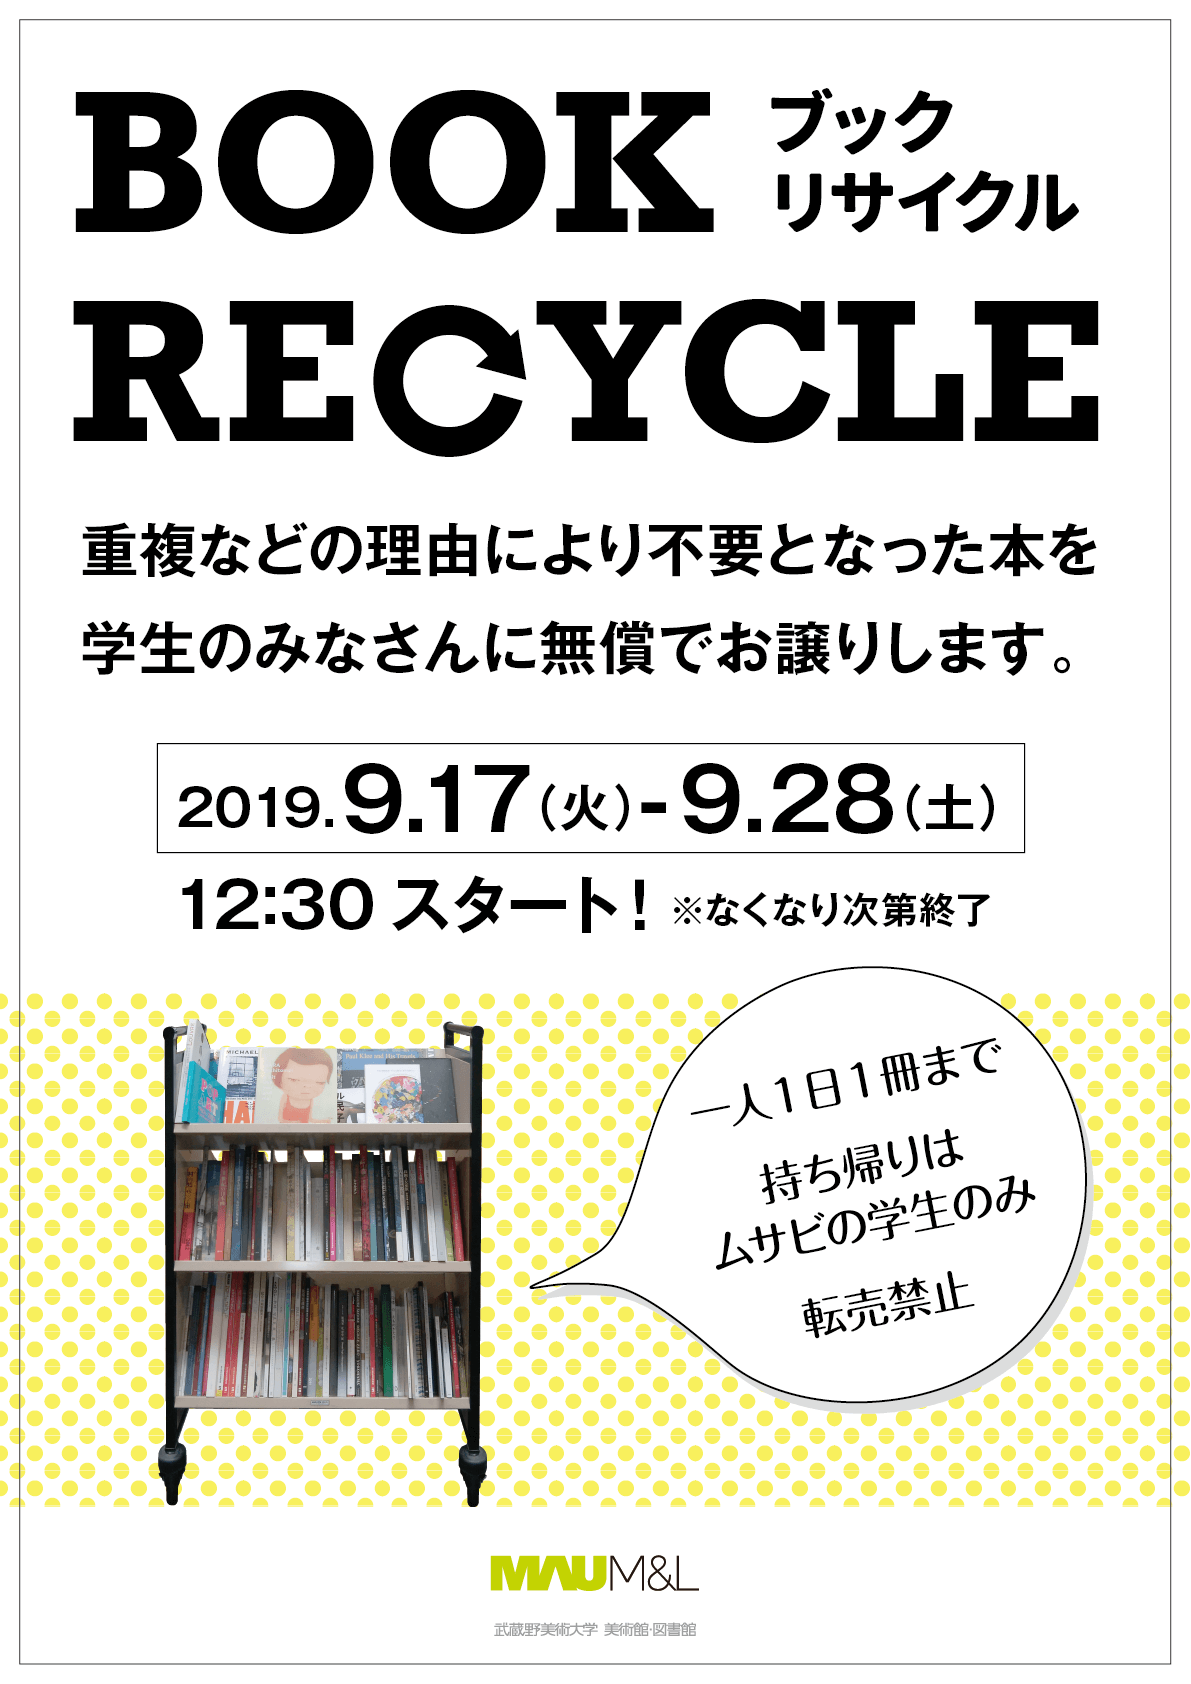 Book Recycle｜ブックリサイクル